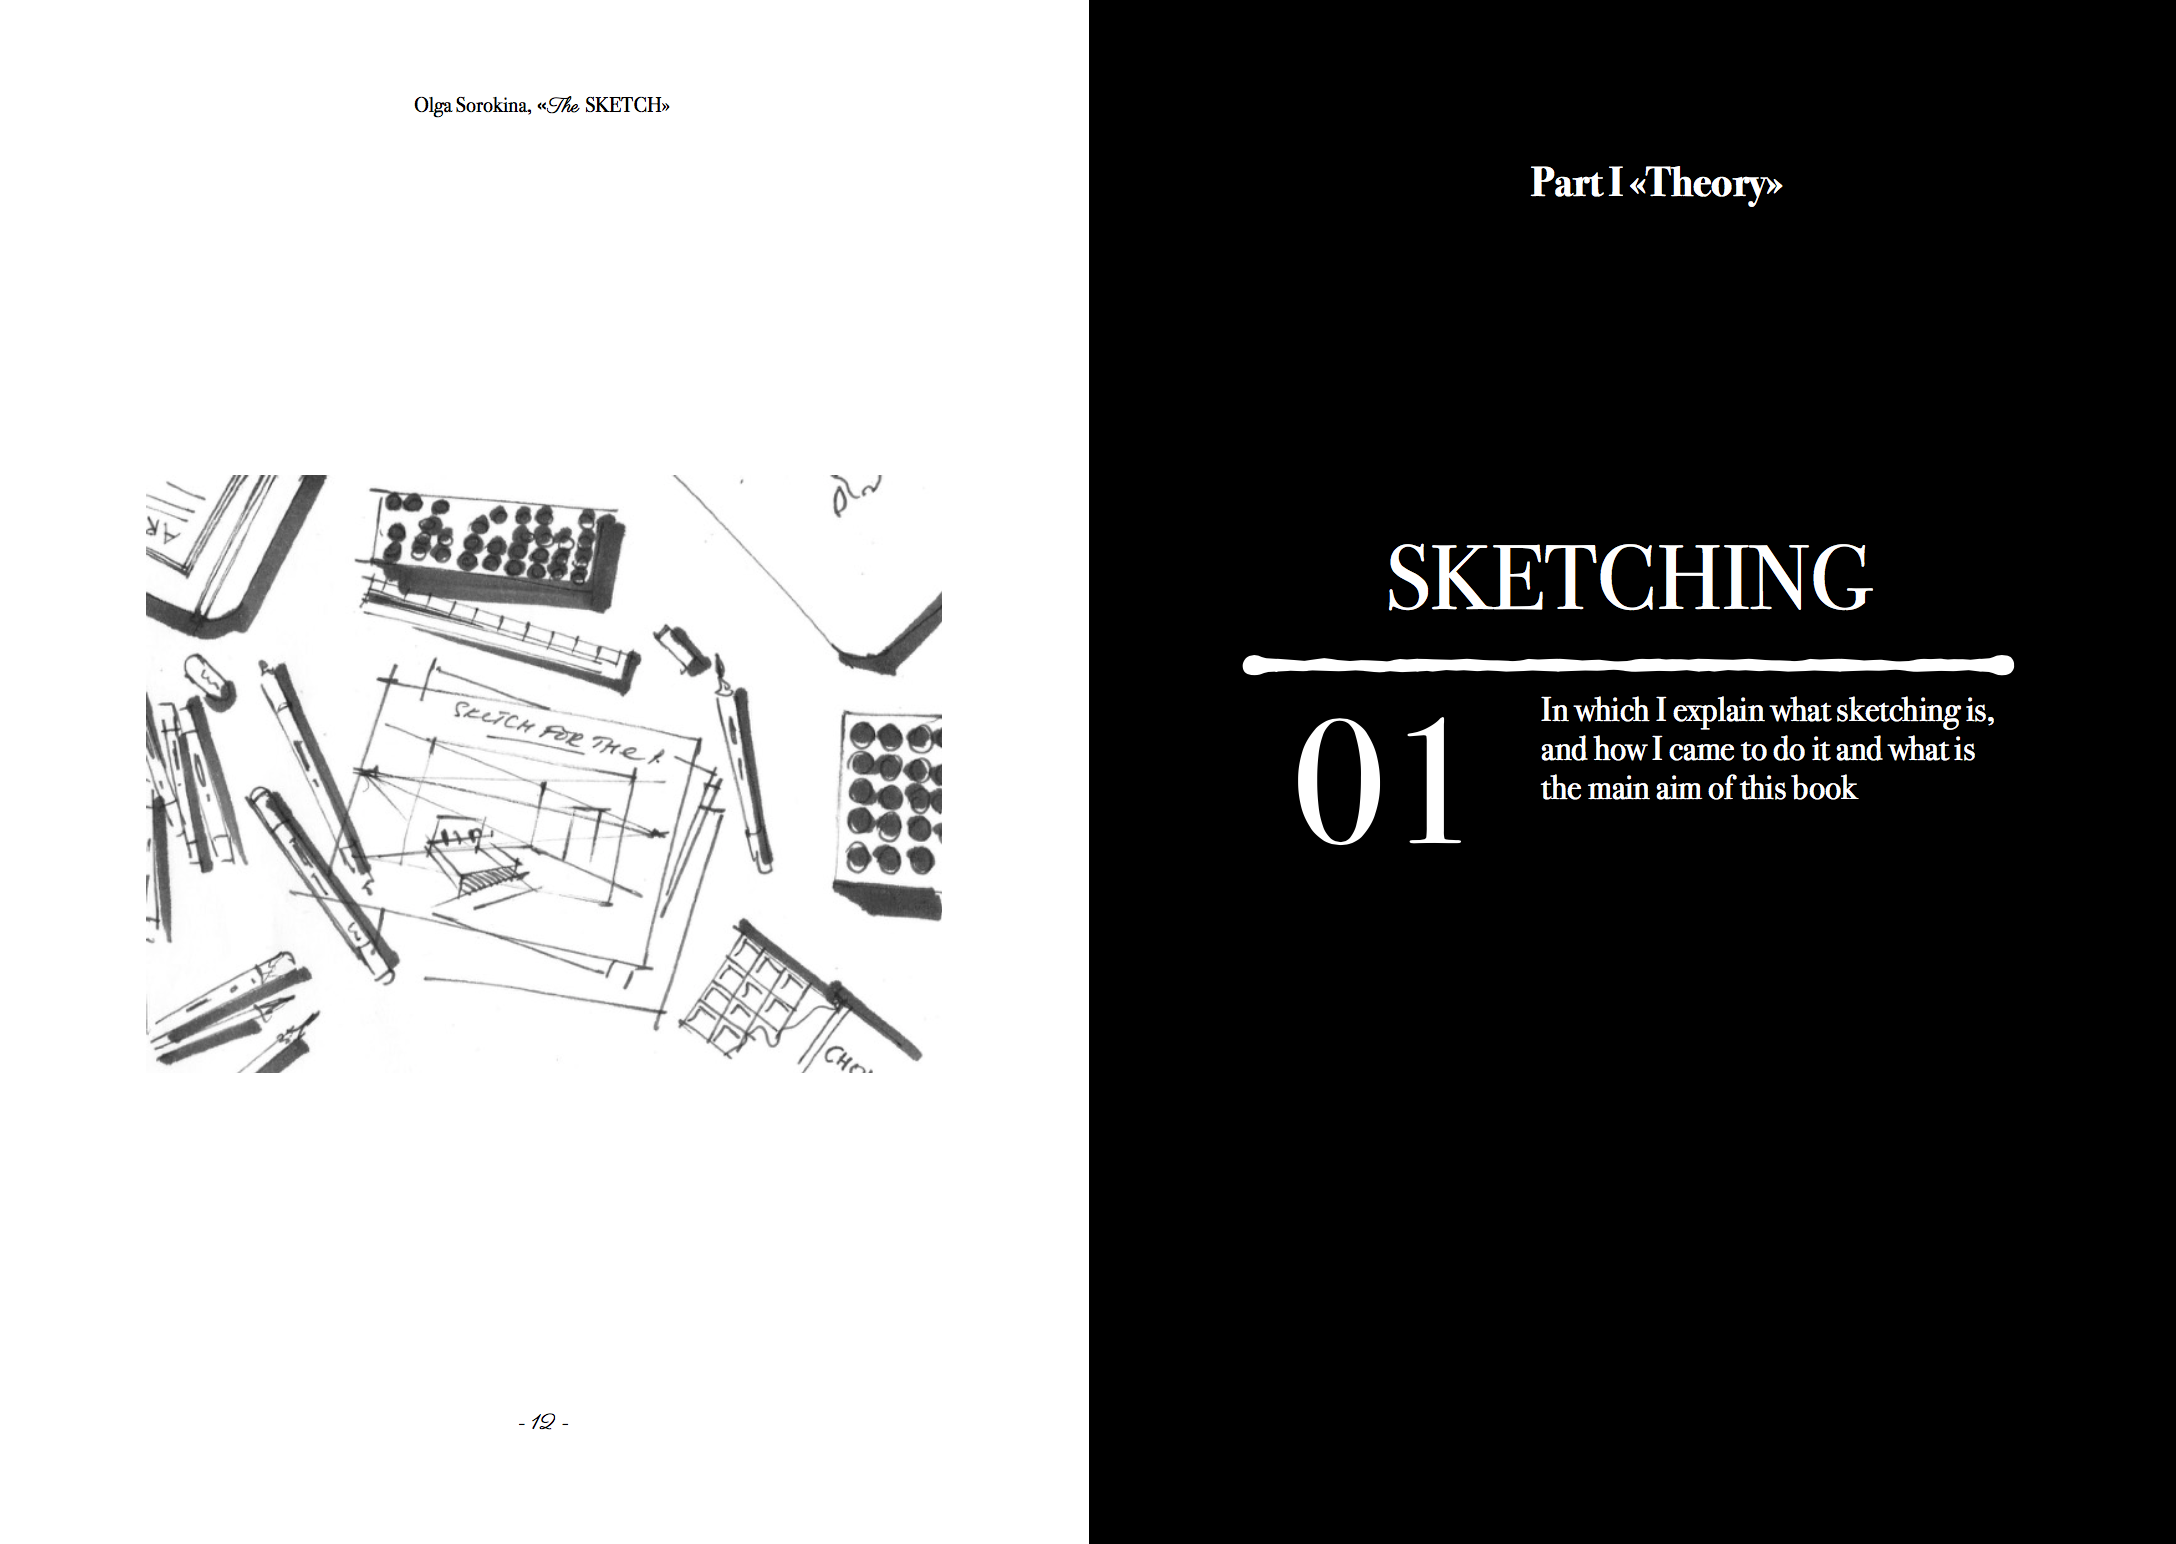 Top 5 books on perspective drawing: my personal choice — School of Sketching  by Olga Sorokina